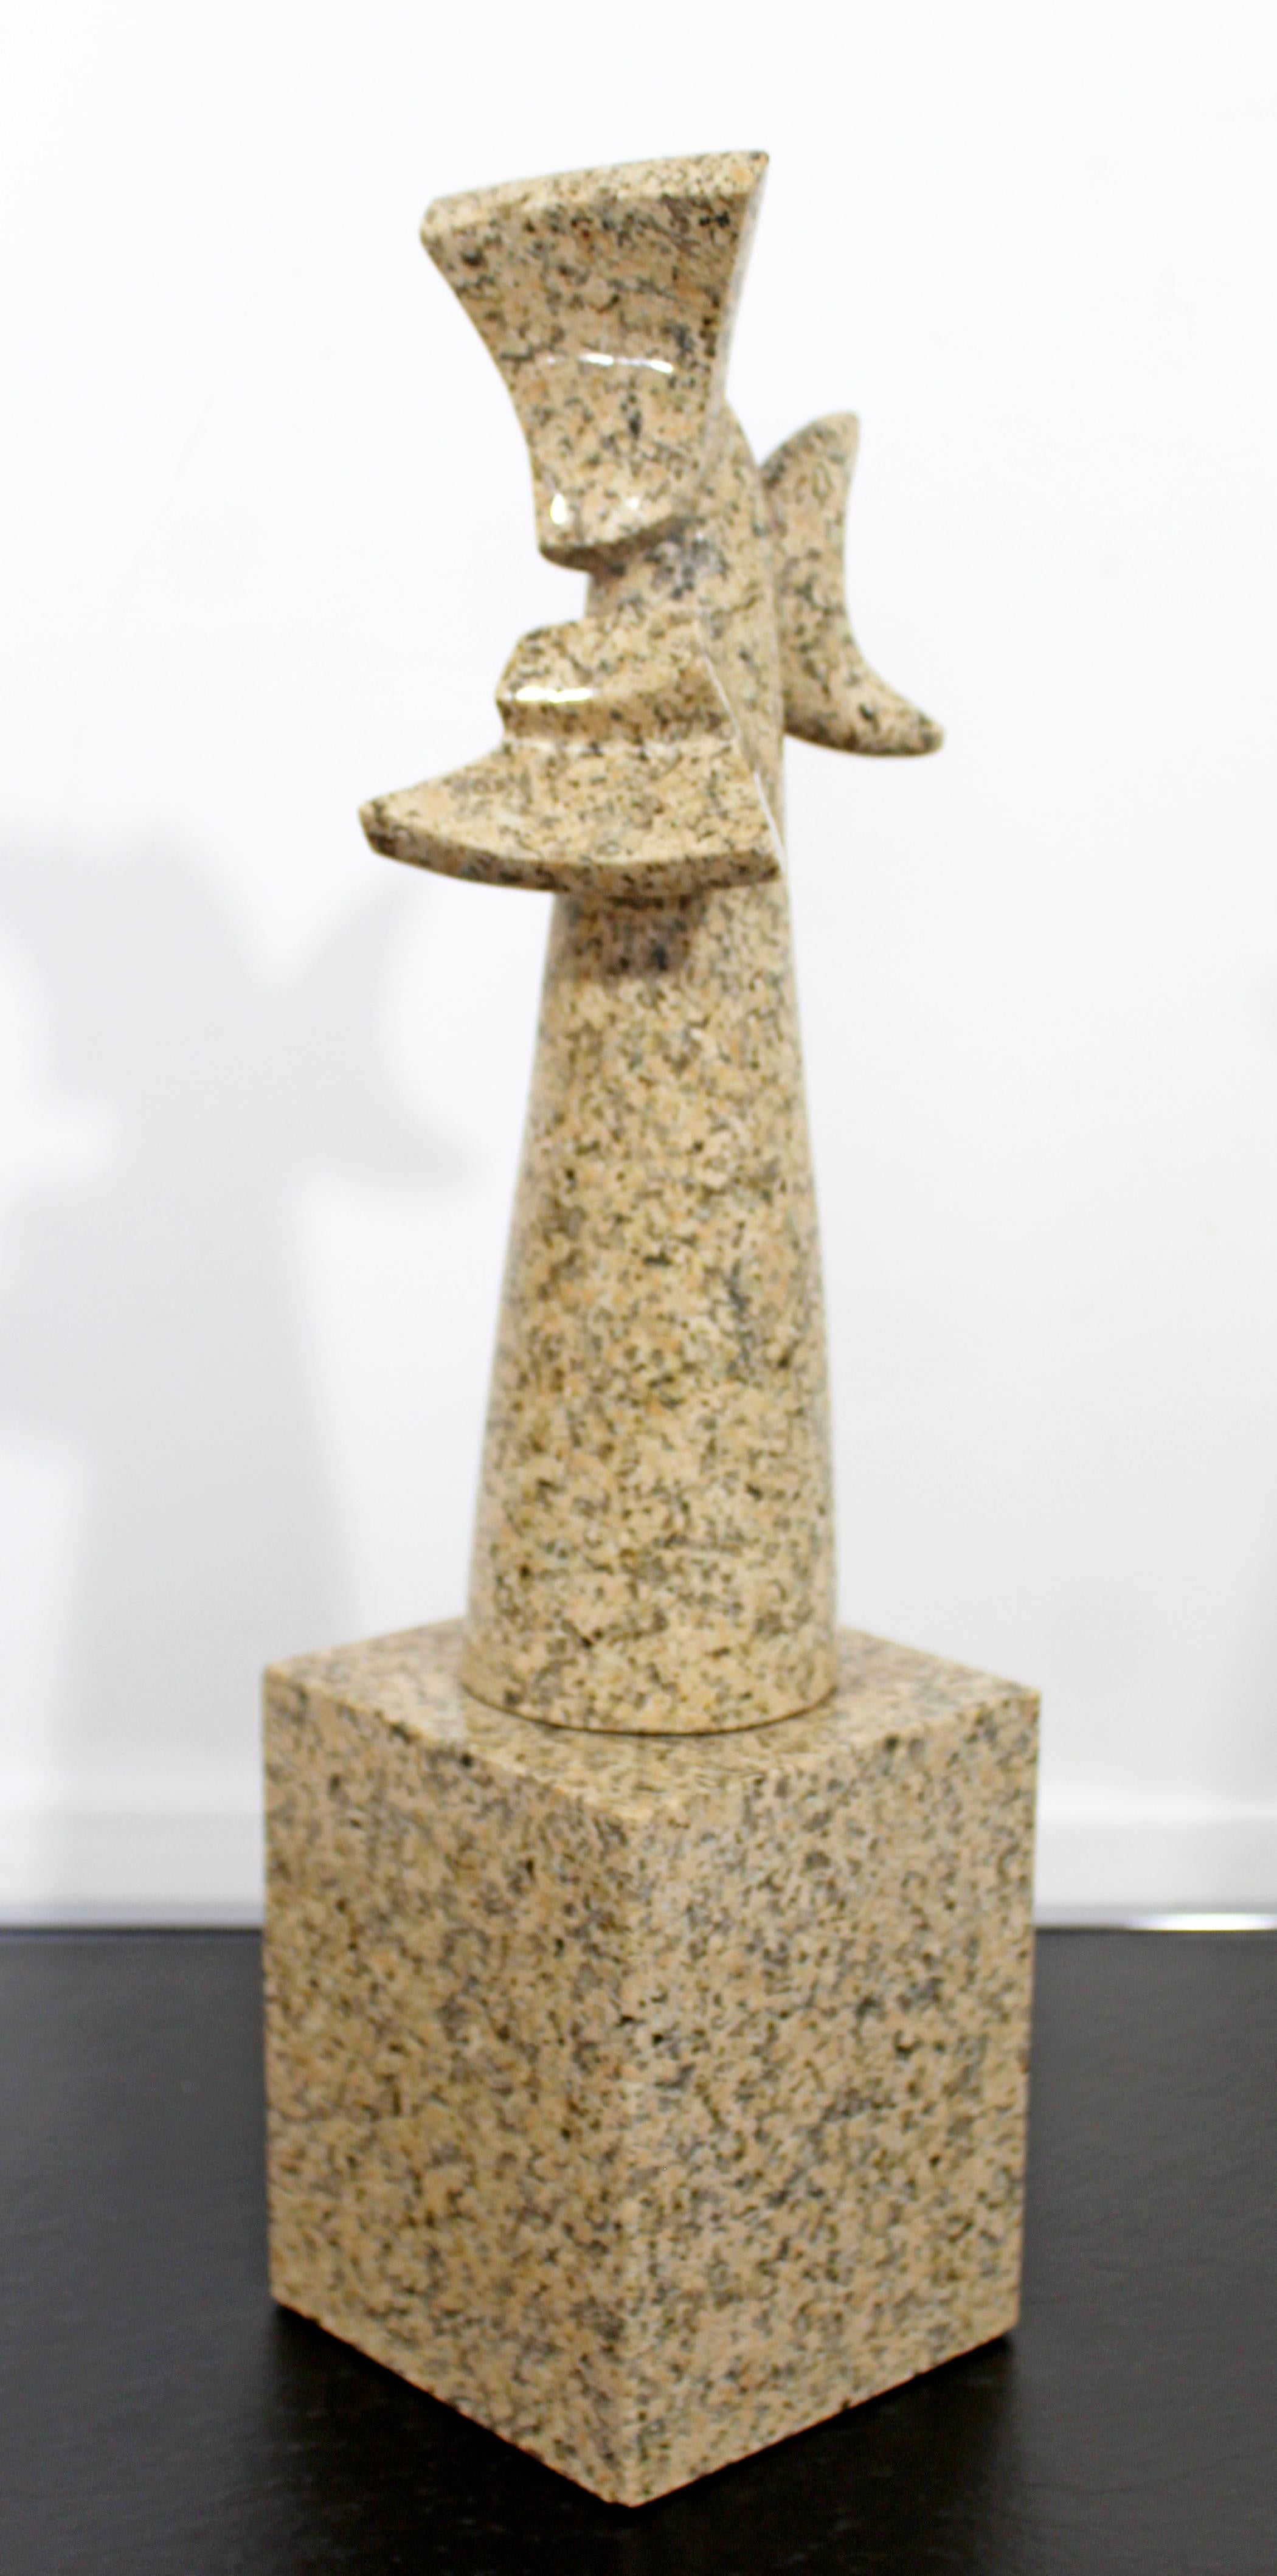 For your consideration is a unique, abstract table sculpture, made of granite. In excellent condition. The dimensions are 4.5